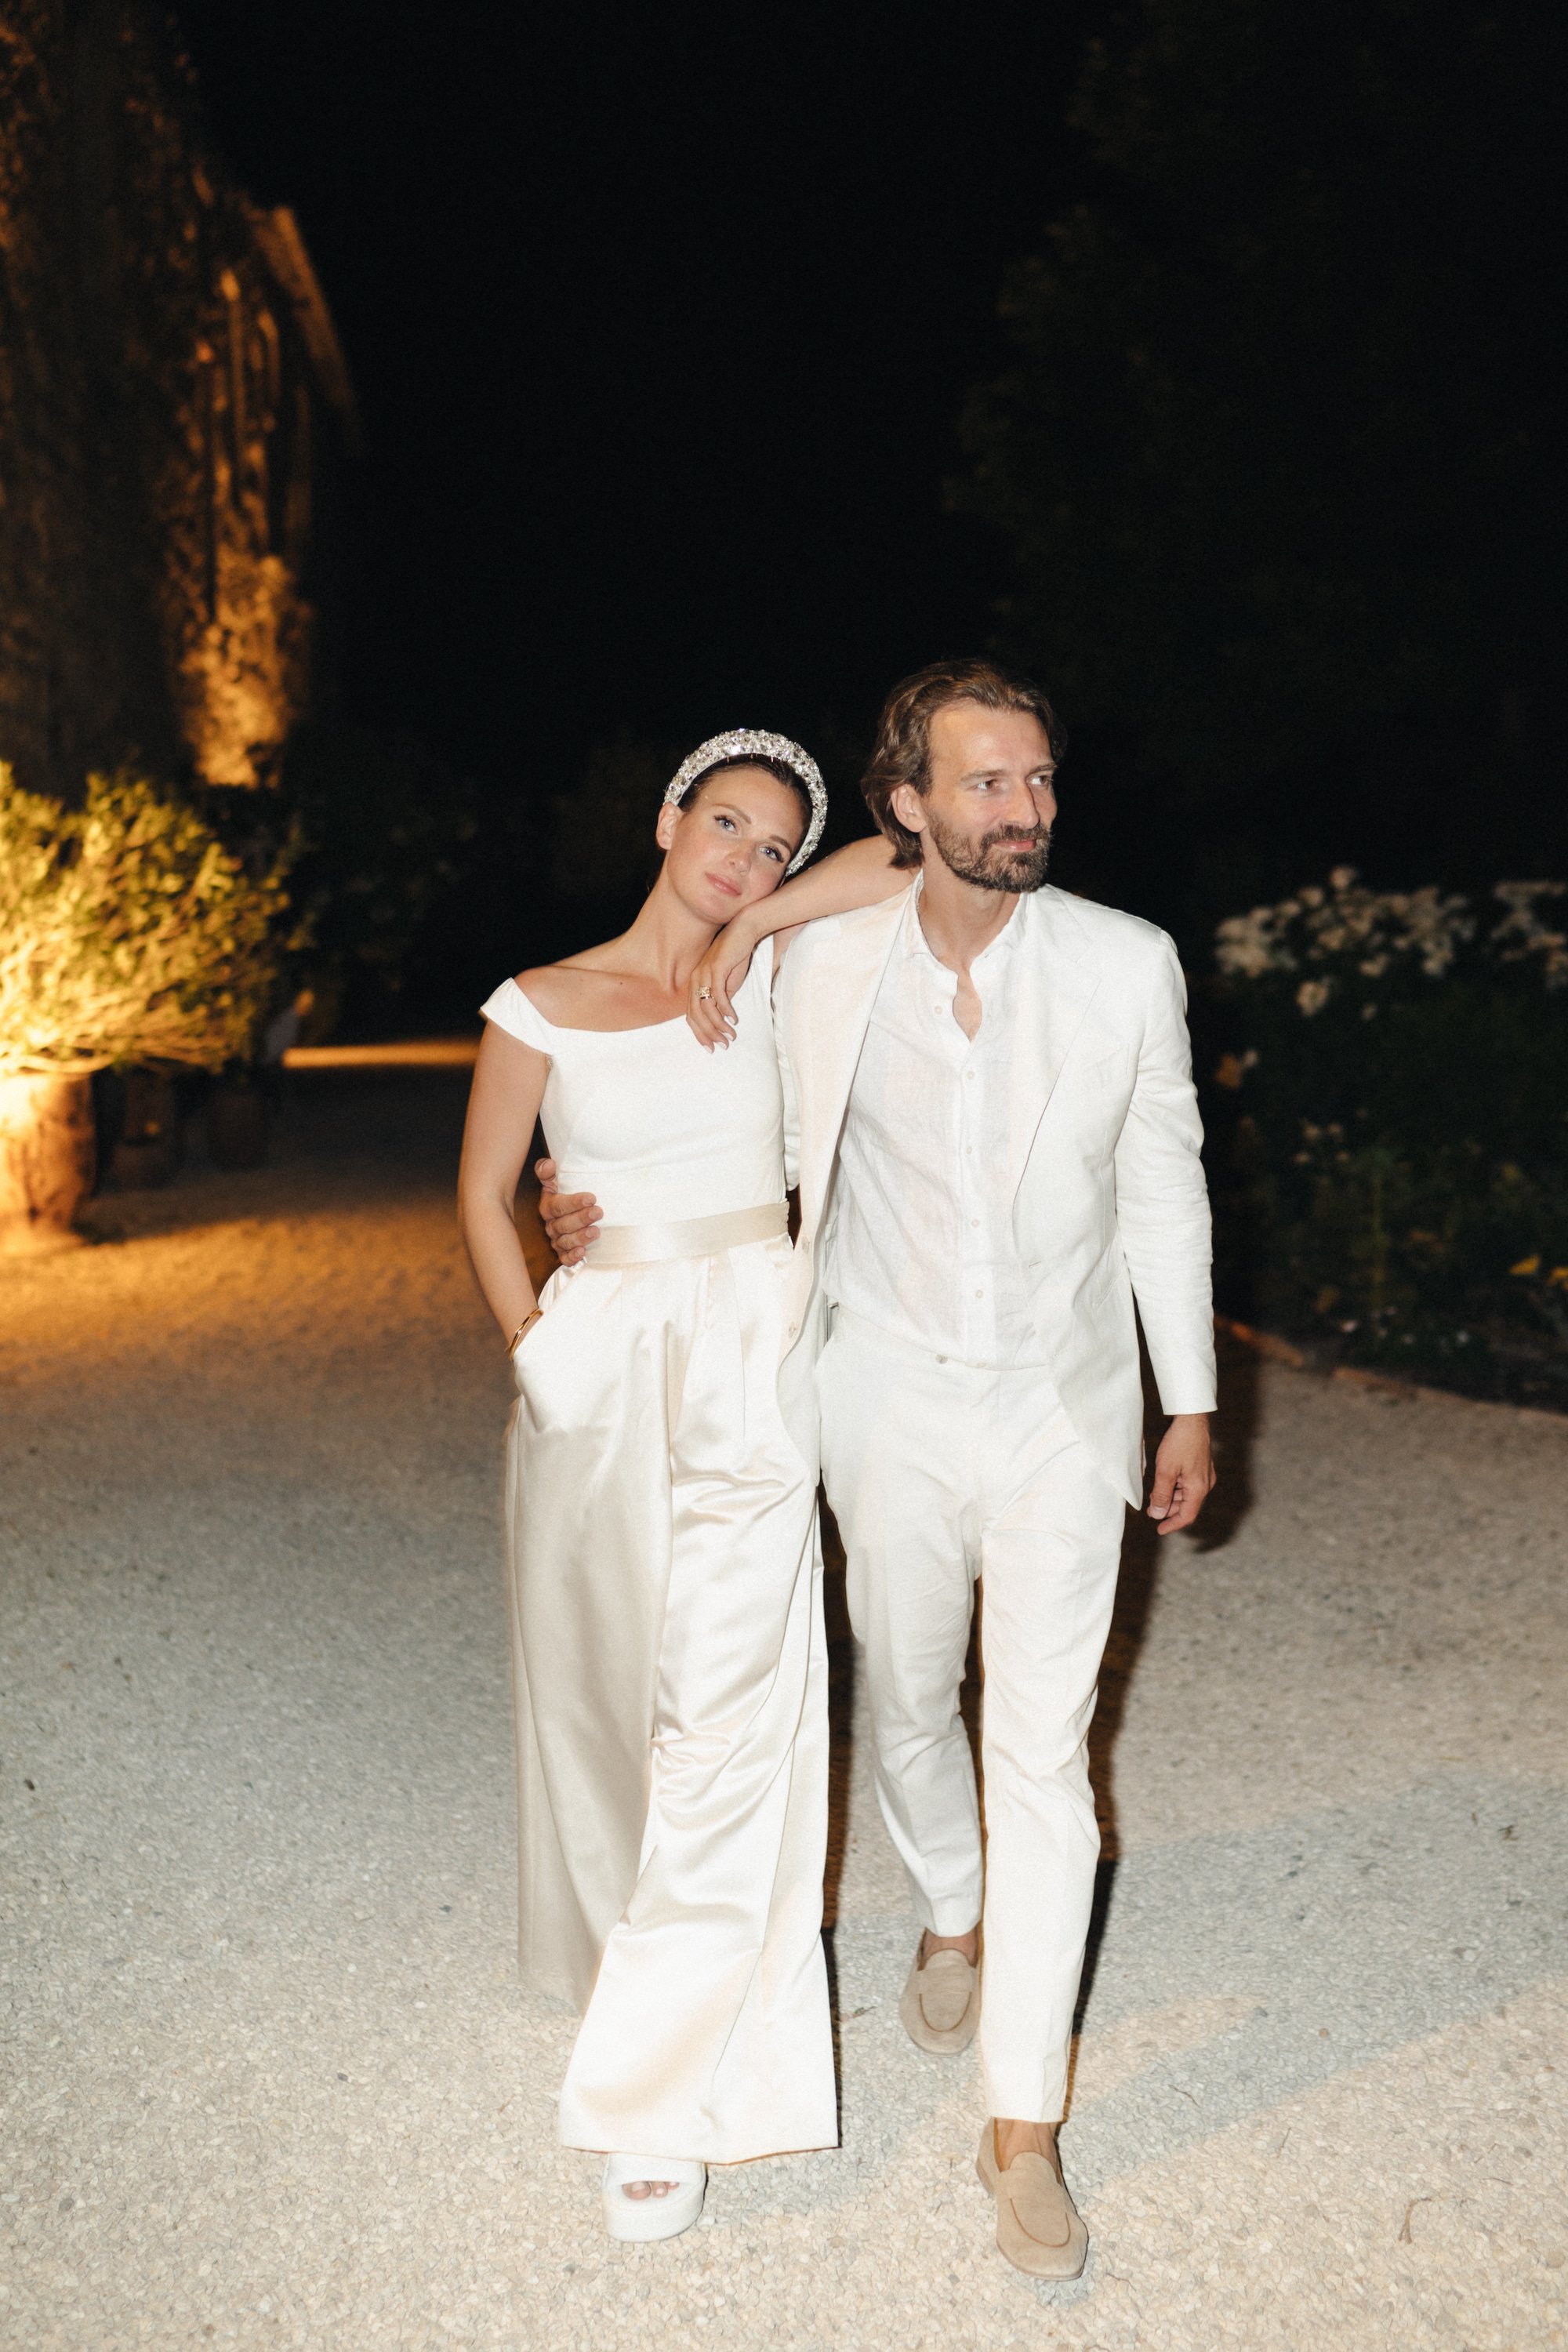 Gorgeous bride Naomi Ross wore a Halfpenny London wedding dress for her special day